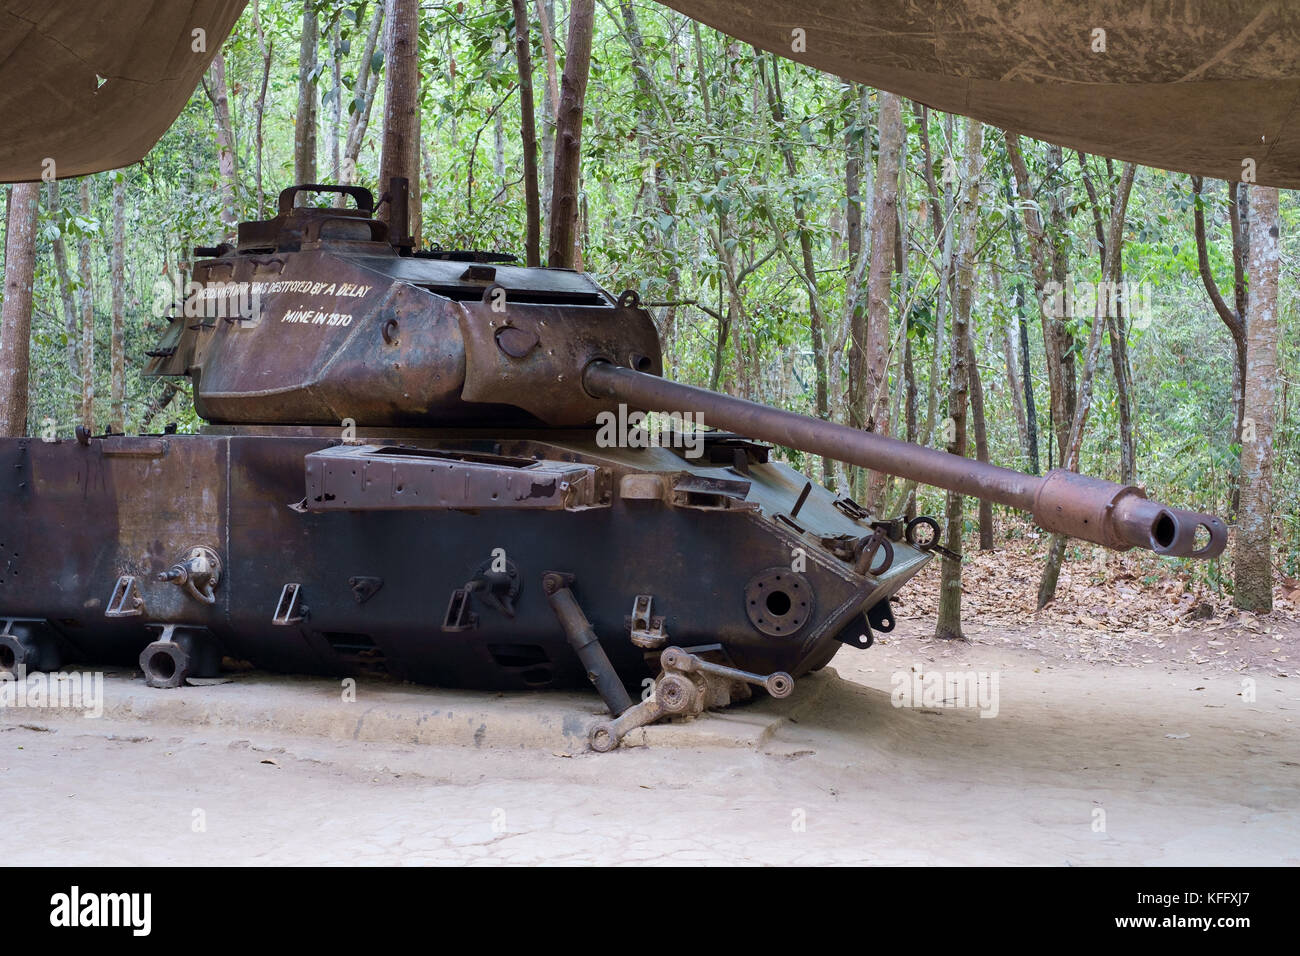 Abandoned American Tank from the Vietnam War Stock Photo